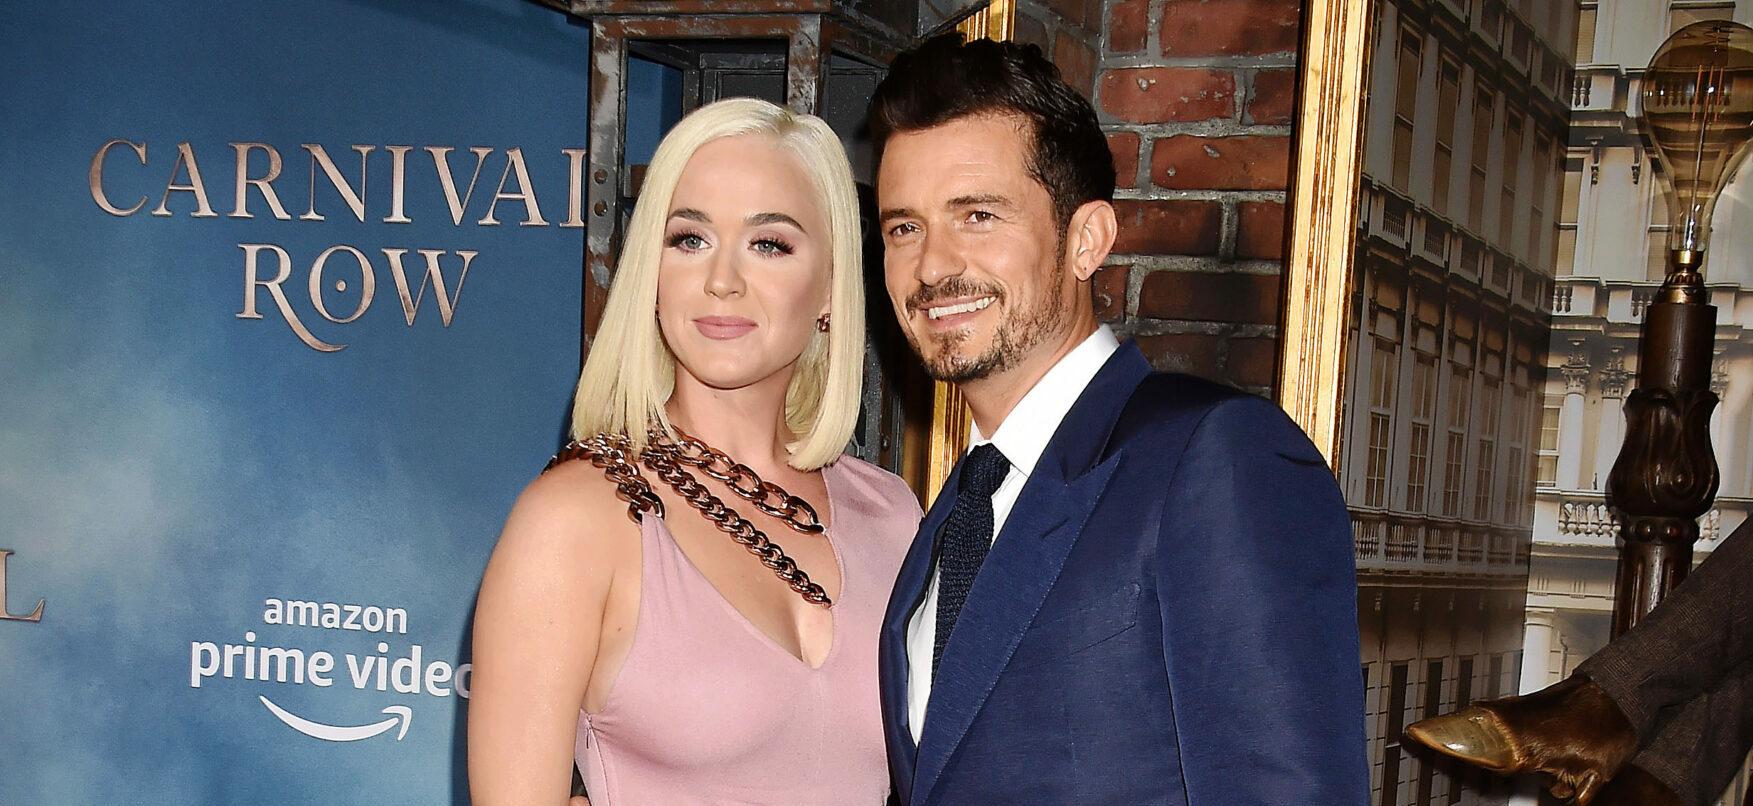 Orlando Bloom Reacts To Katy Perry’s Hair Transformation And Fans Are Loving It